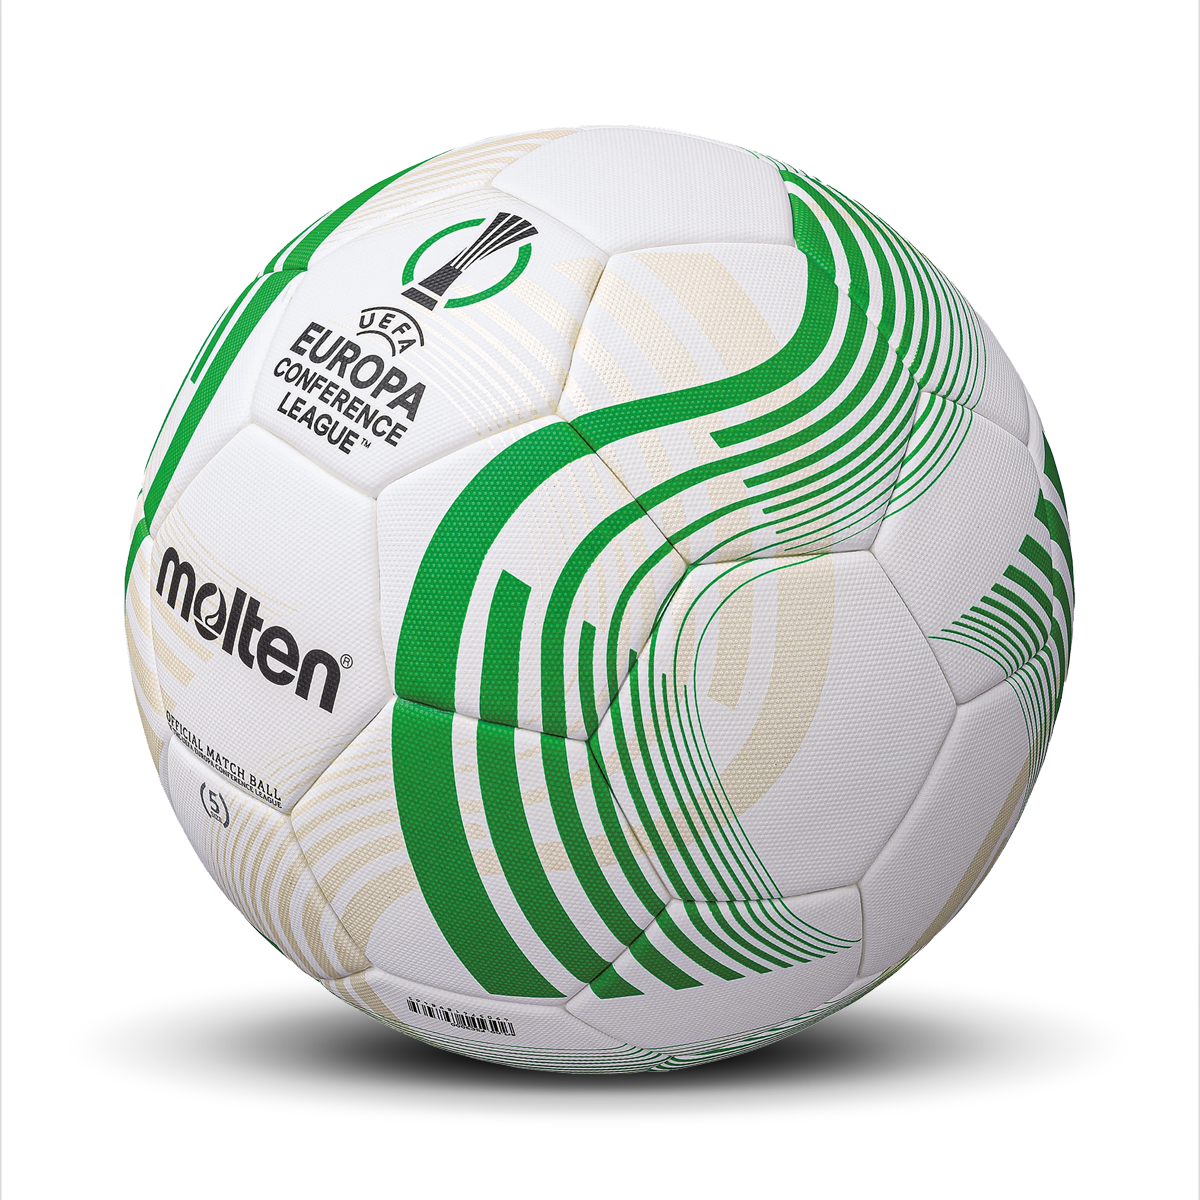 UEFA Europa Conference League 22/23 Molten Official Match Football UEFA Club Competitions Online Store